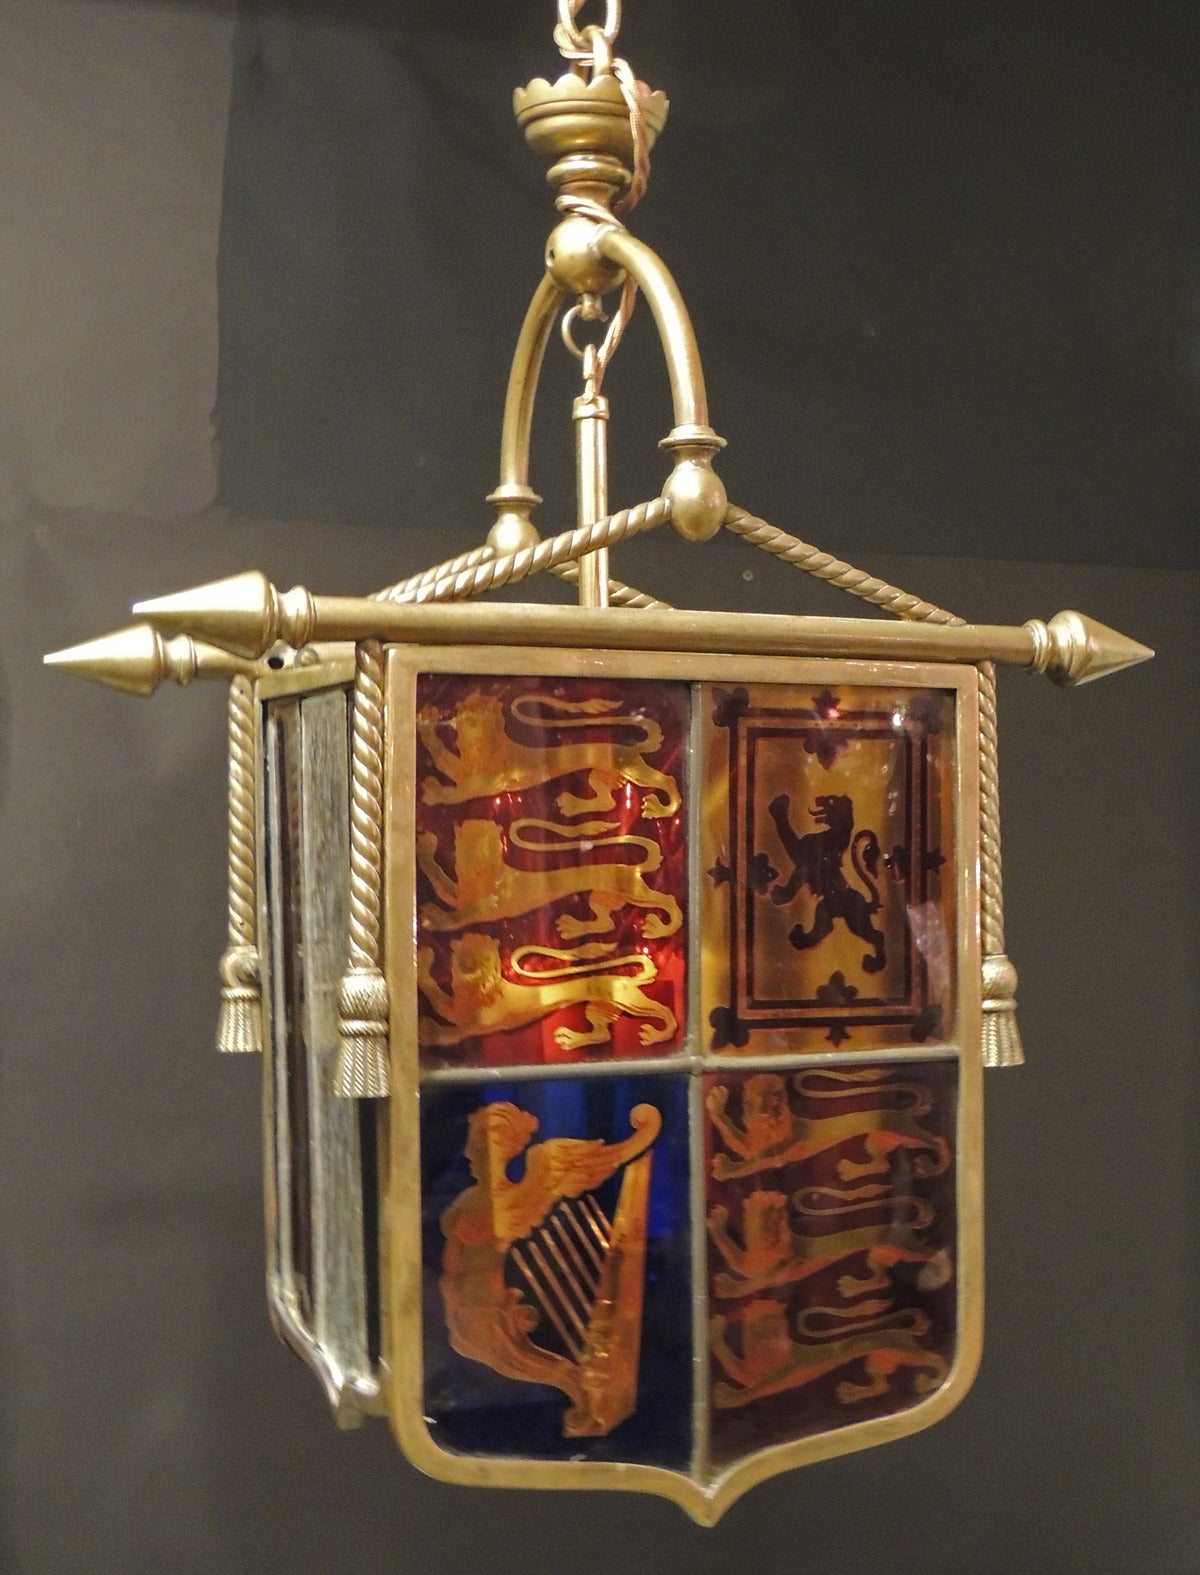 This four sided chandelier features the British coat of arms on one side and the Union Jack on the other all done in the shapes of banners and made of glass. In between the two banners there is a red white and blue panels. This chandelier is